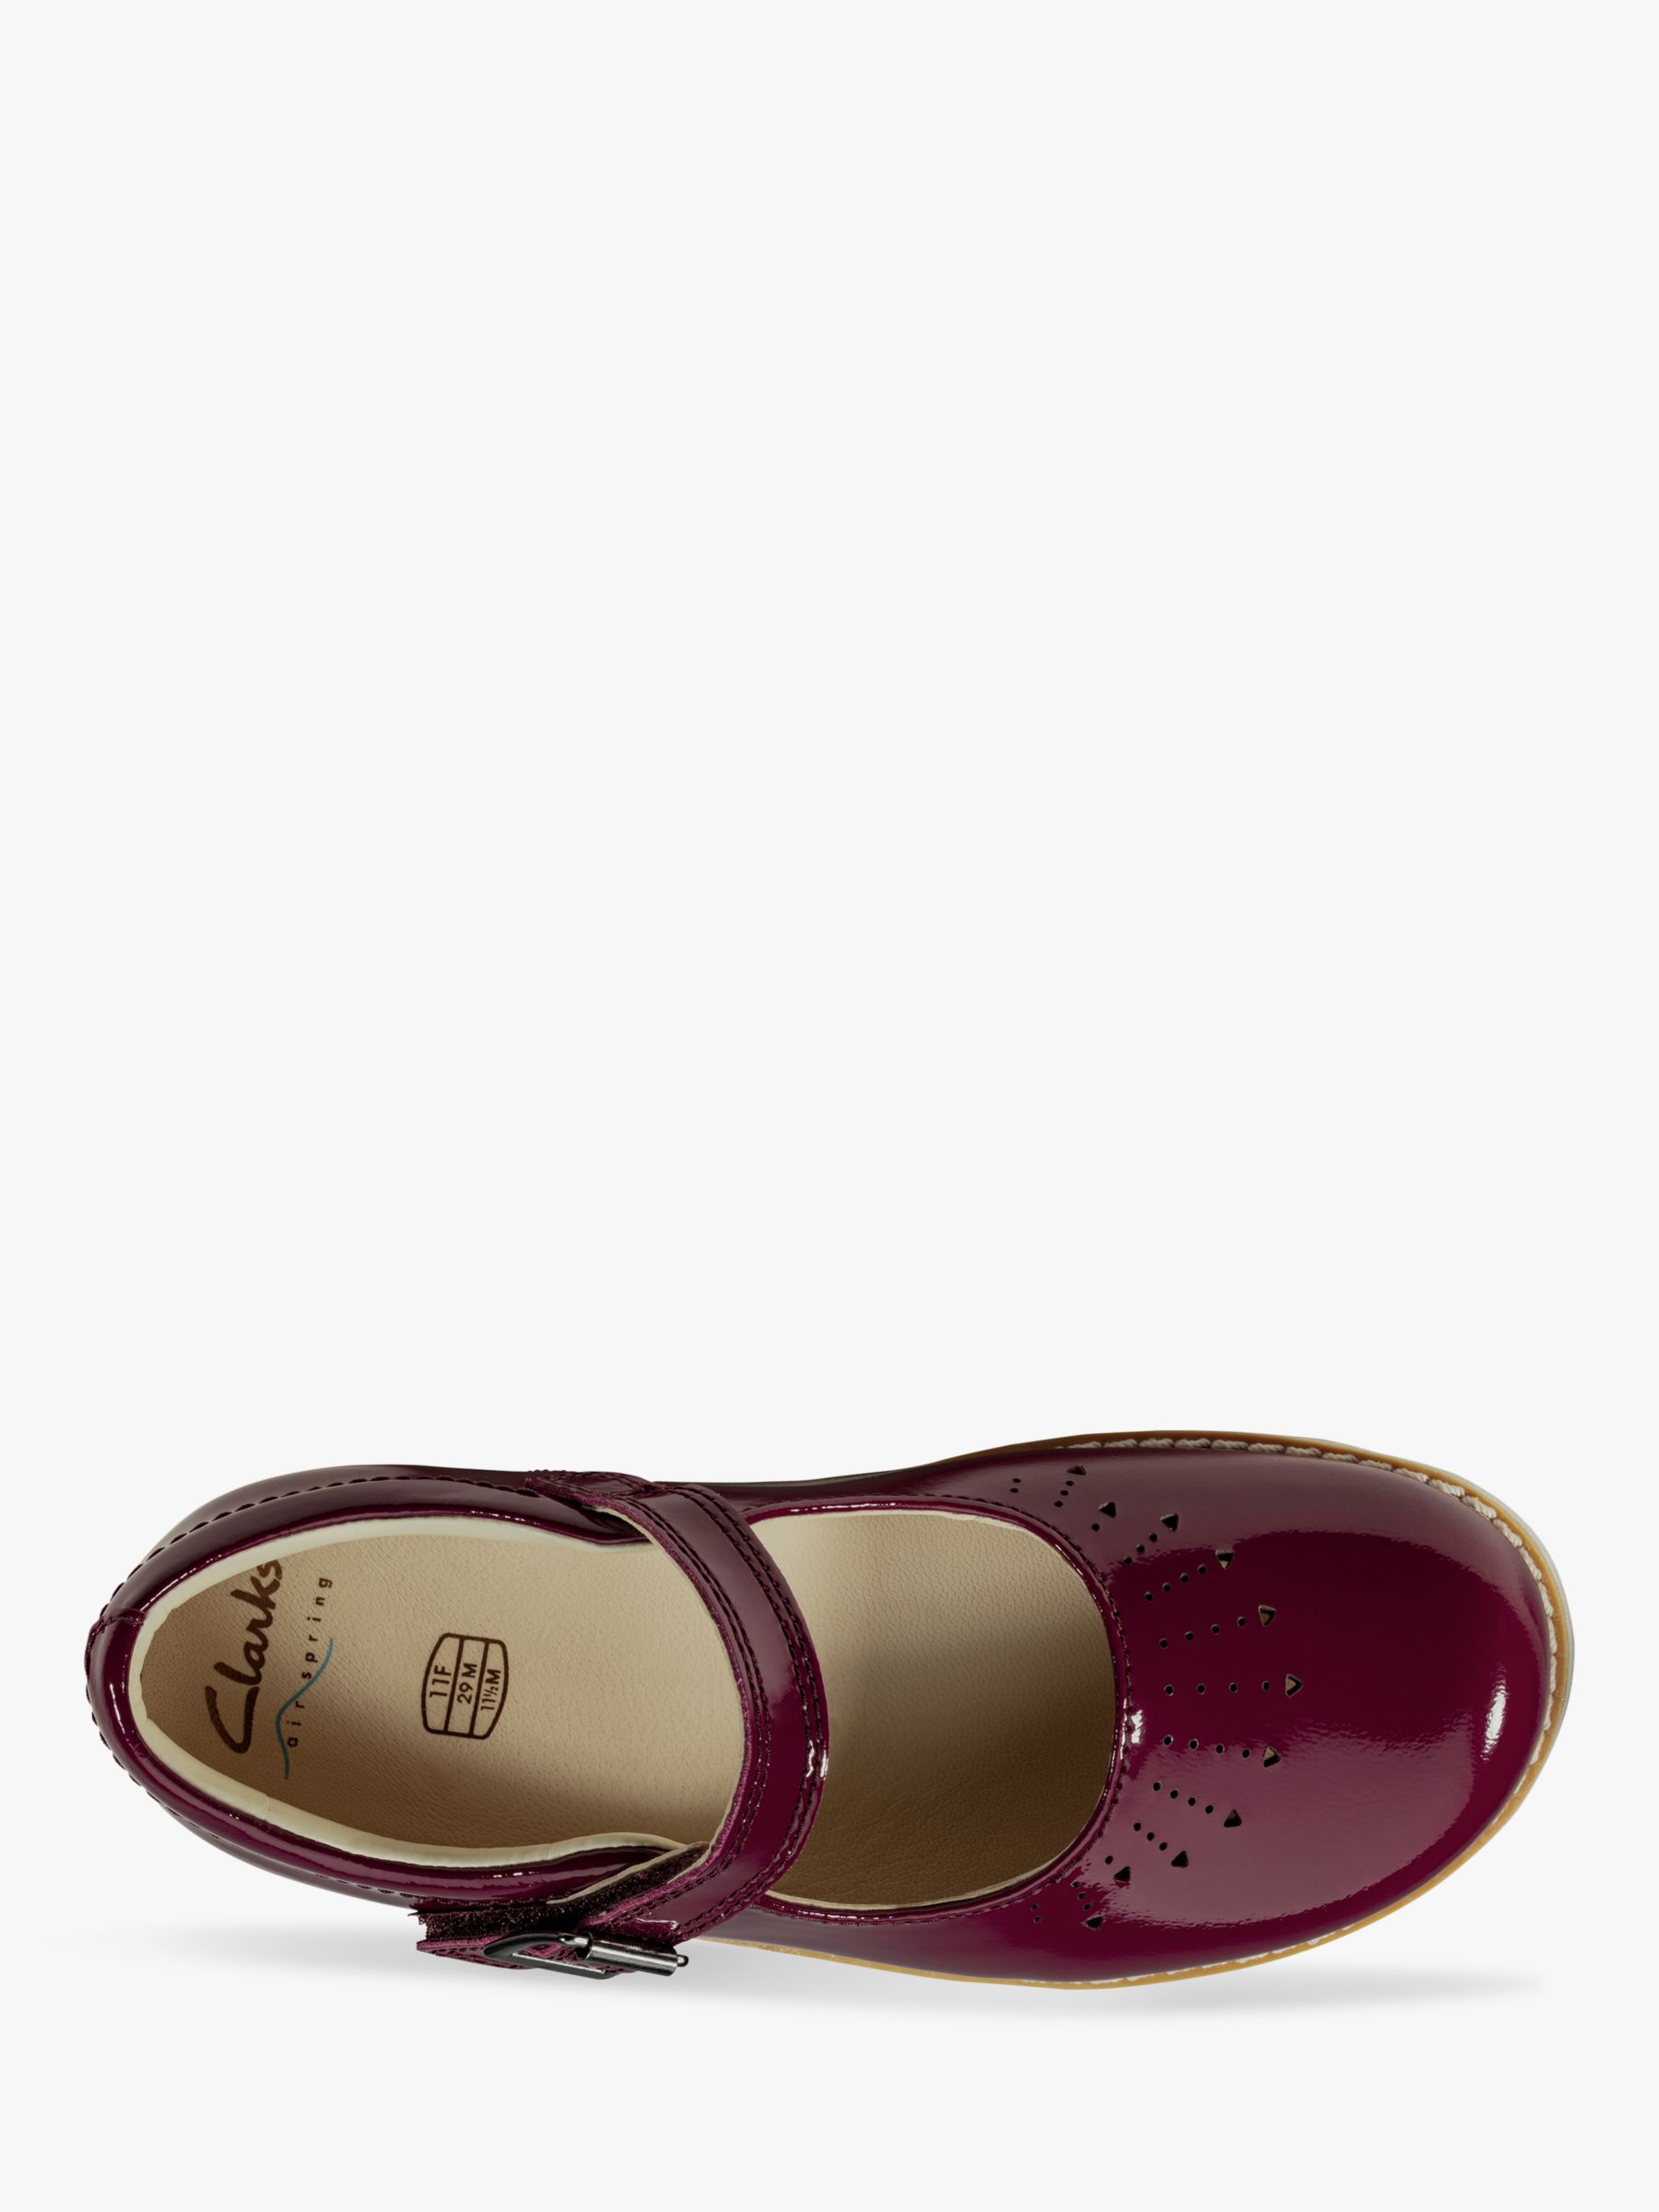 clarks plum shoes off 79% - online-sms.in